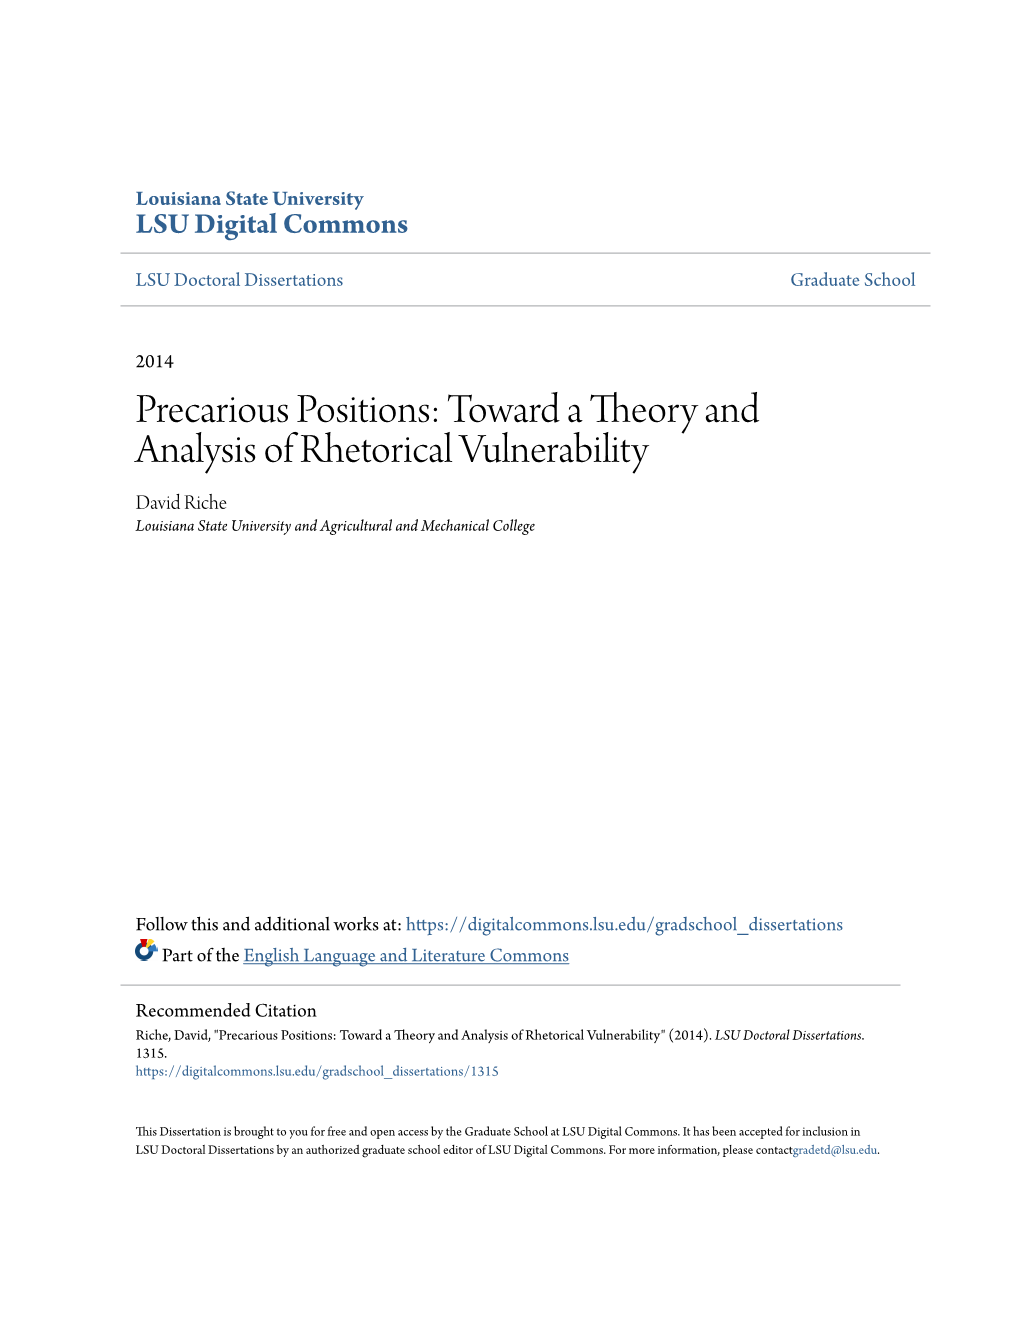 Toward a Theory and Analysis of Rhetorical Vulnerability David Riche Louisiana State University and Agricultural and Mechanical College